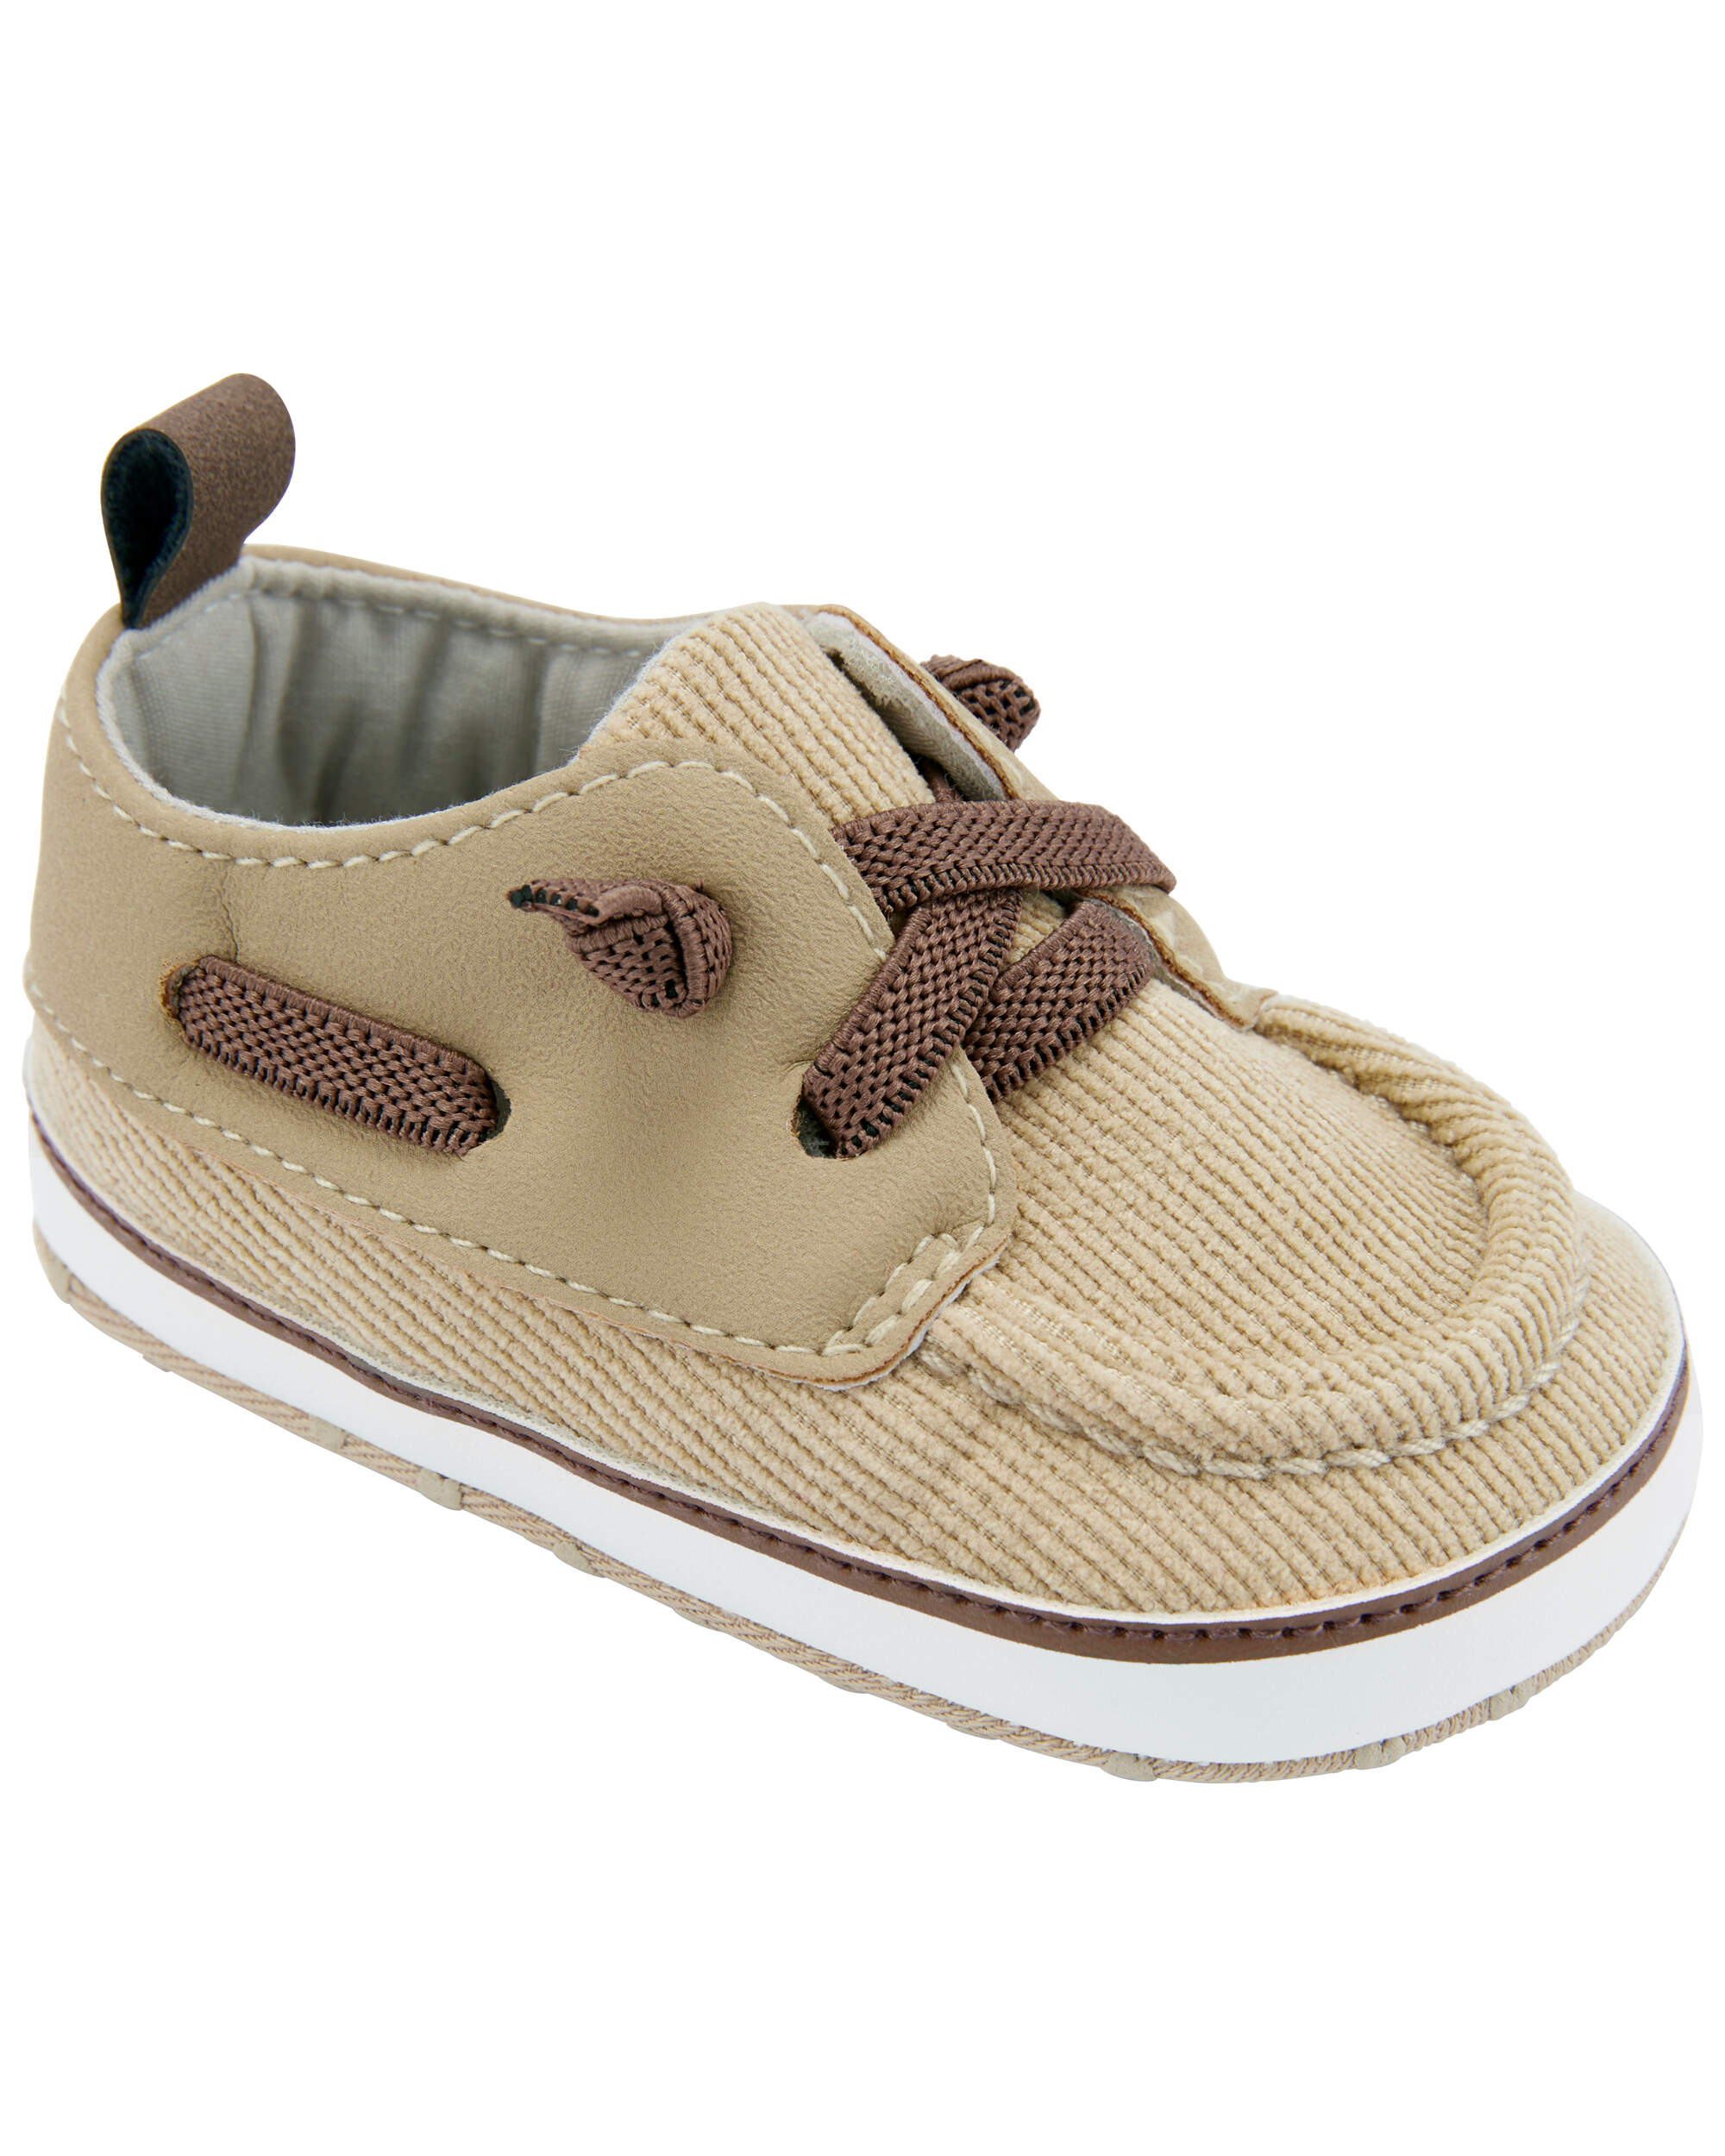 Baby Boat Shoes